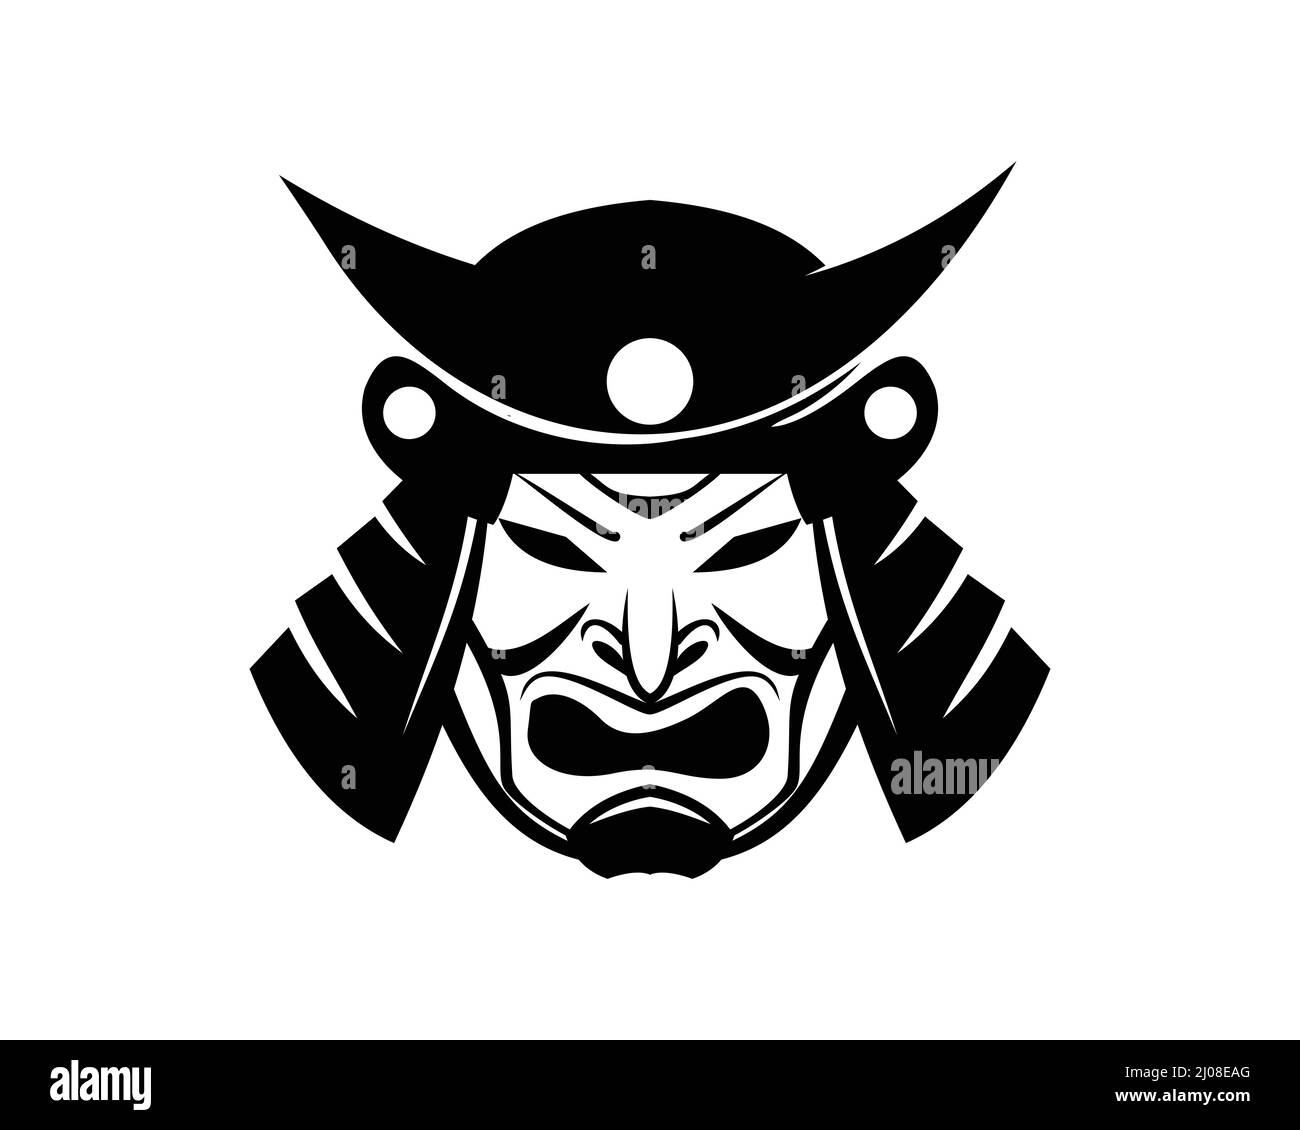 Samurai Warrior Mask Symbol with Silhouette Style Stock Vector